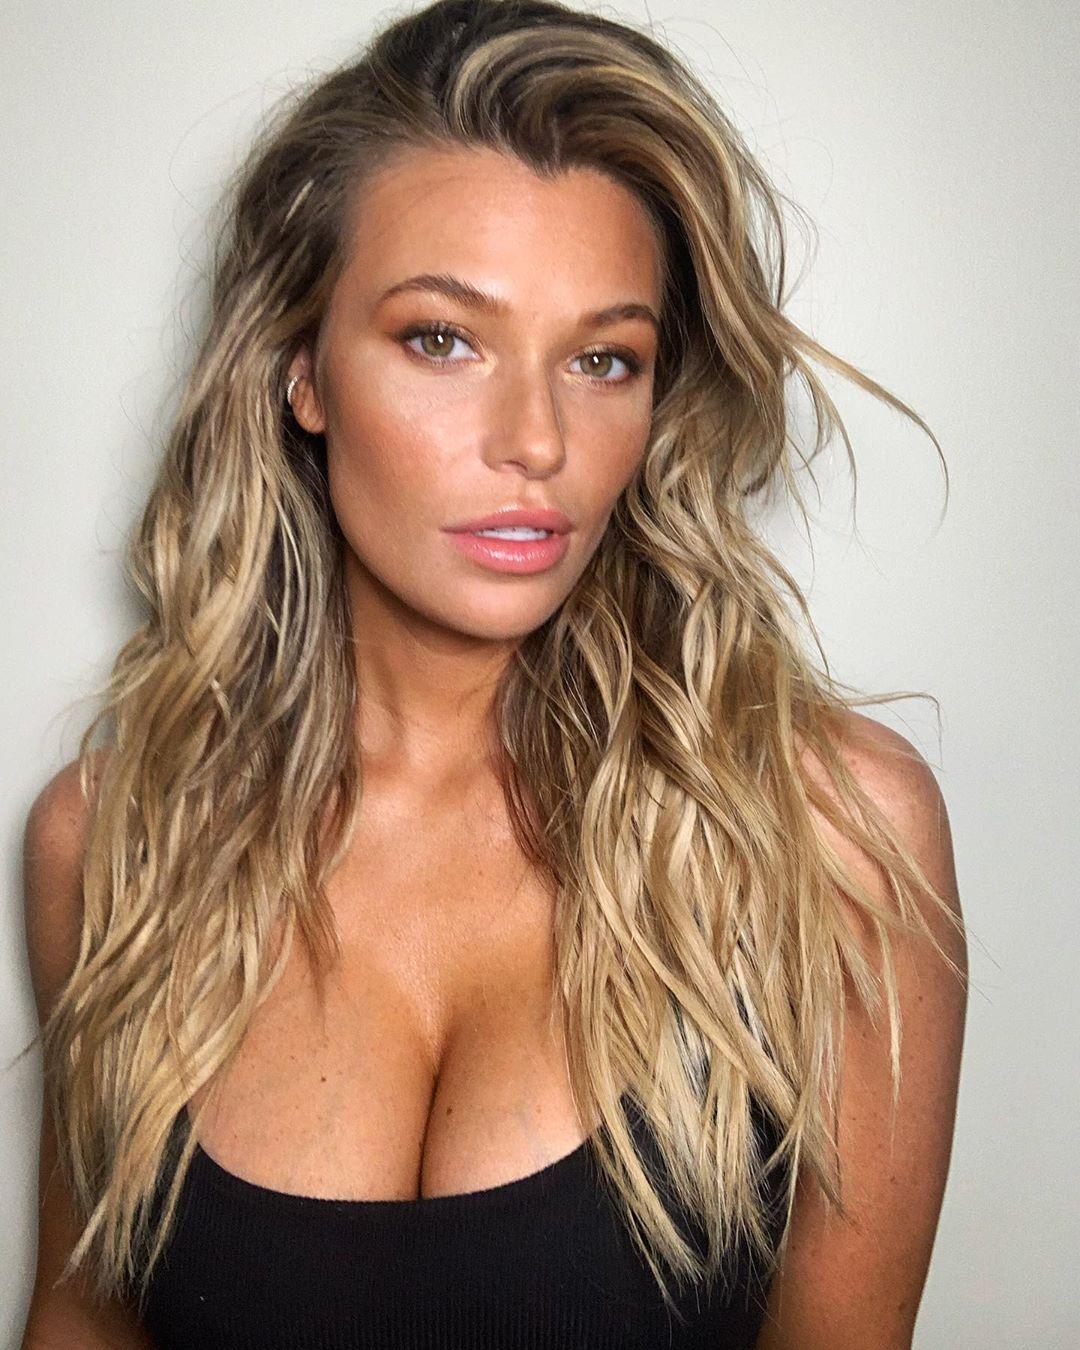 70+ Hot Pictures Of Samantha Hoopes Are Here To Take Your Breath Away 229